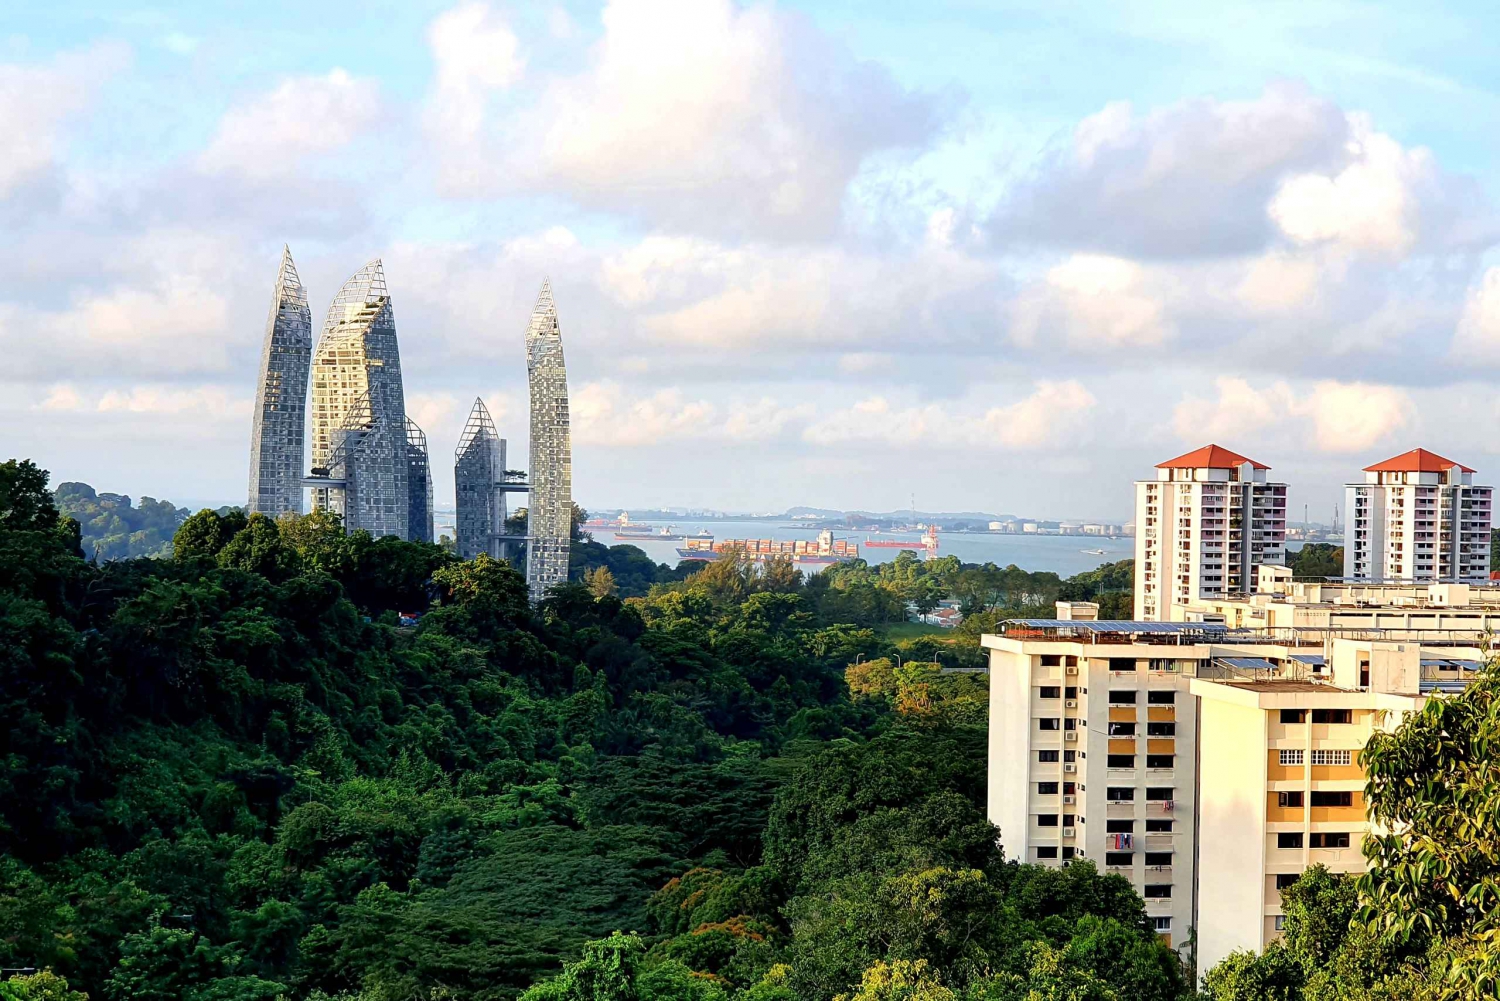 Singapore: Faber Peak Guided Walking Tour with Breakfast